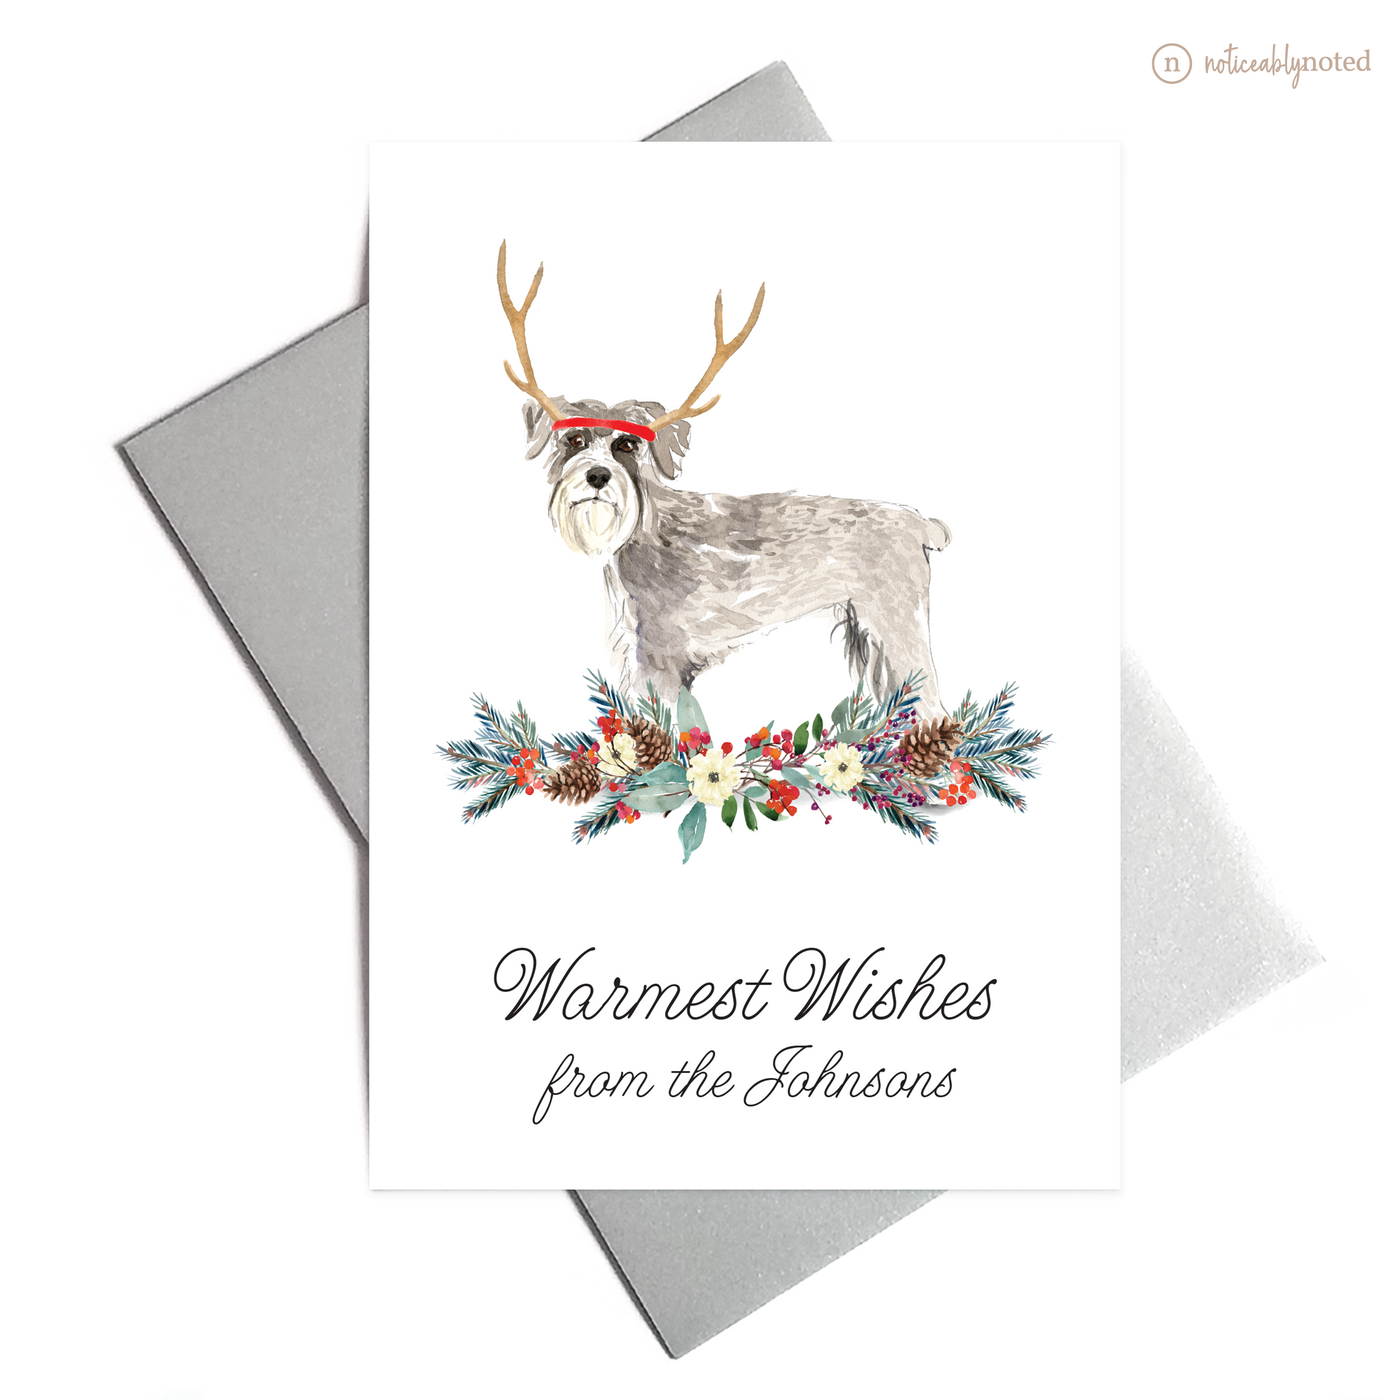 Schnauzer Dog Holiday Greeting Cards | Noticeably Noted